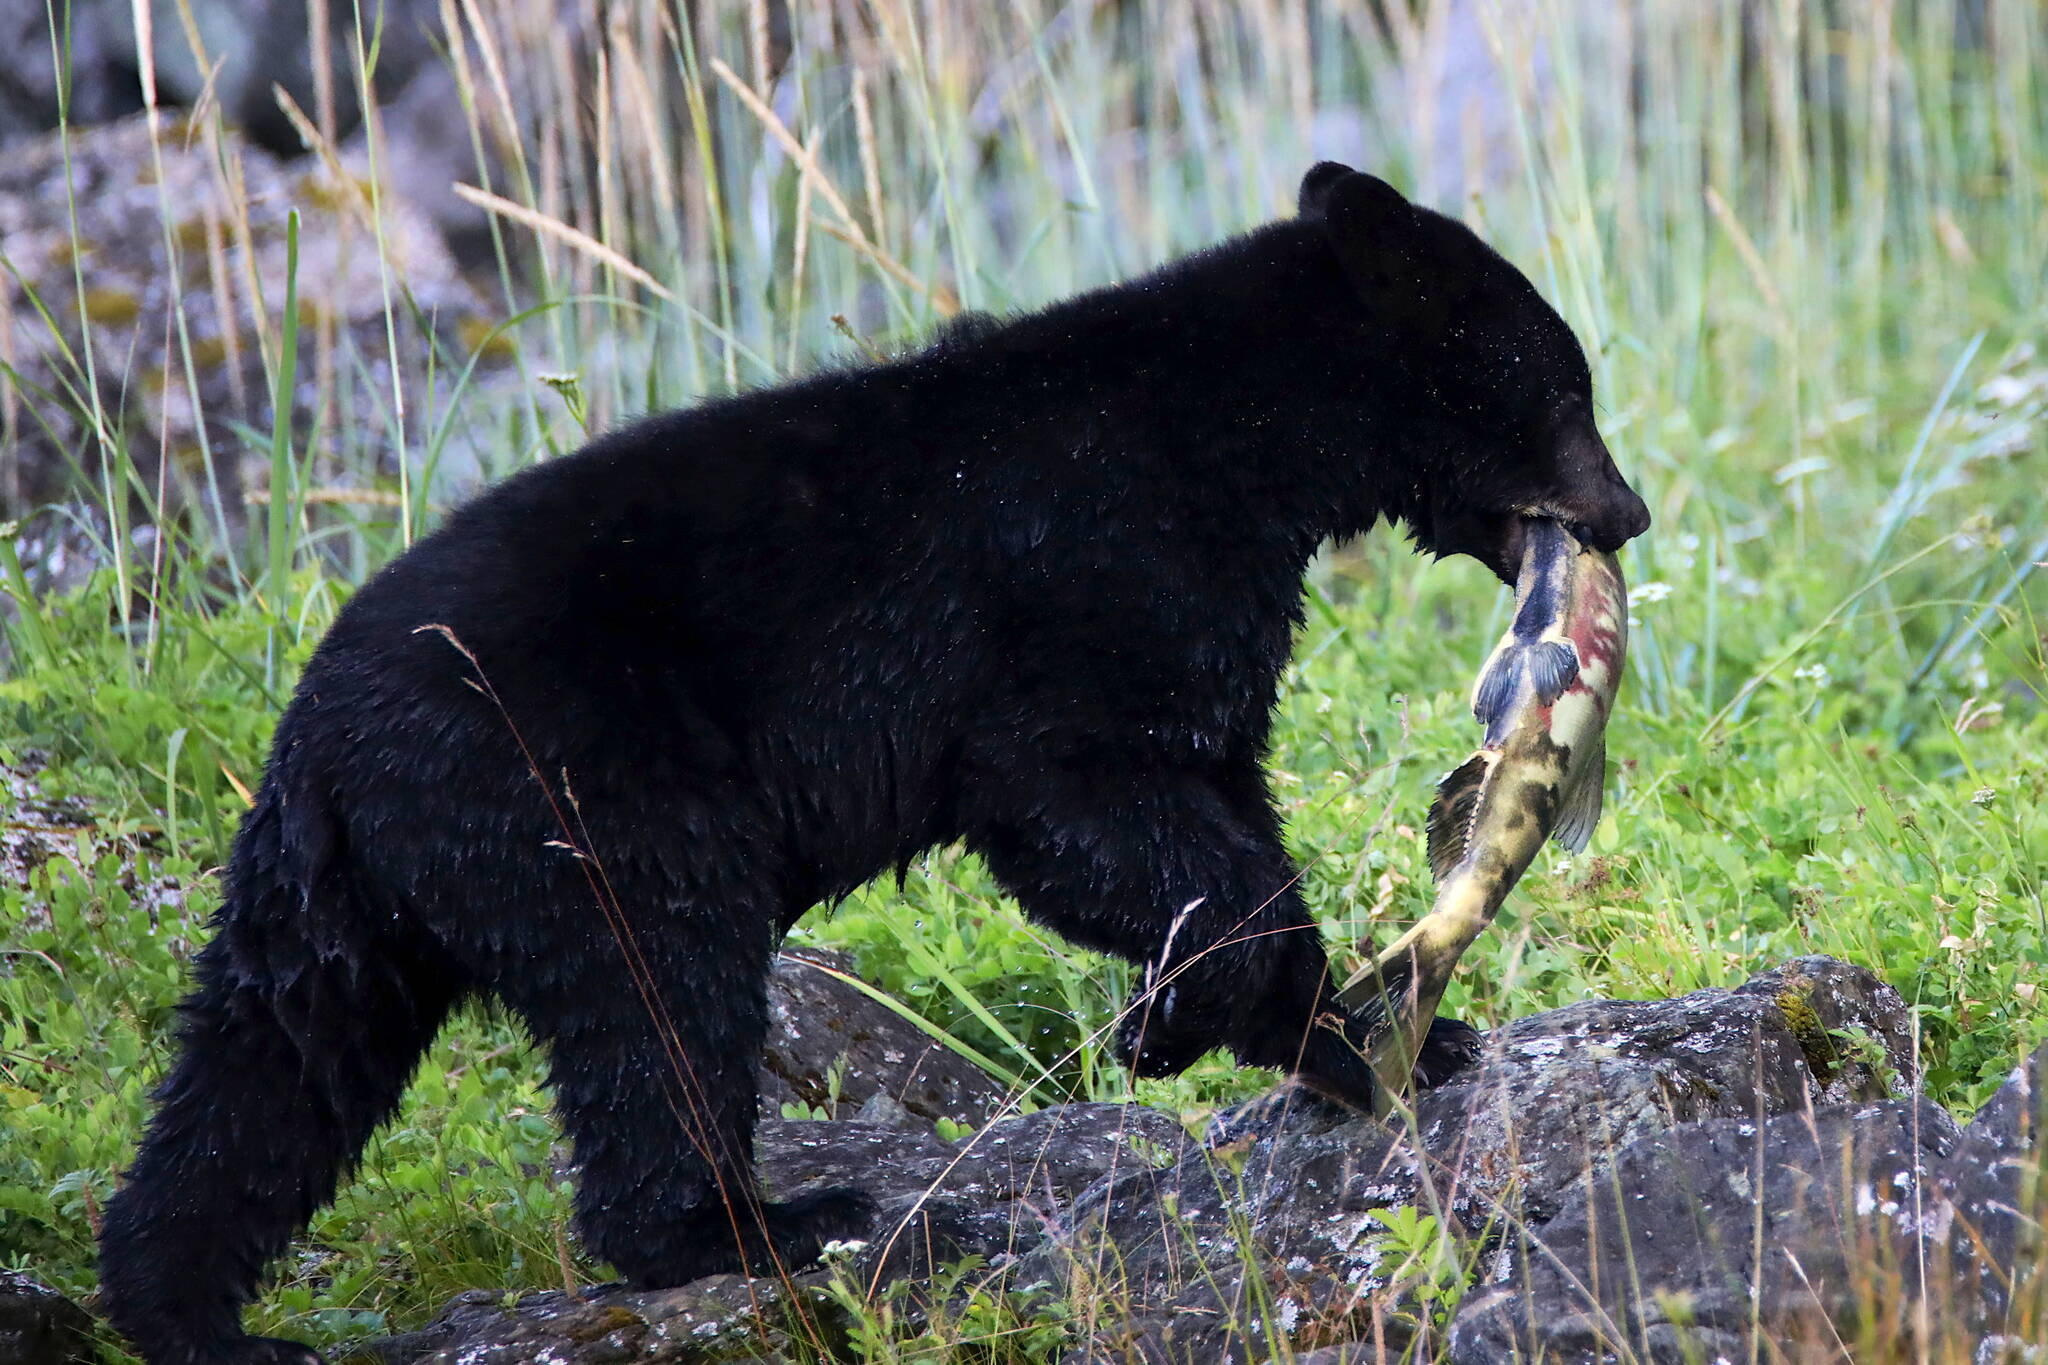 A black bear yearling carries a chum salmon up the bank, but discards it later. (Photo by Stacey Thomas)